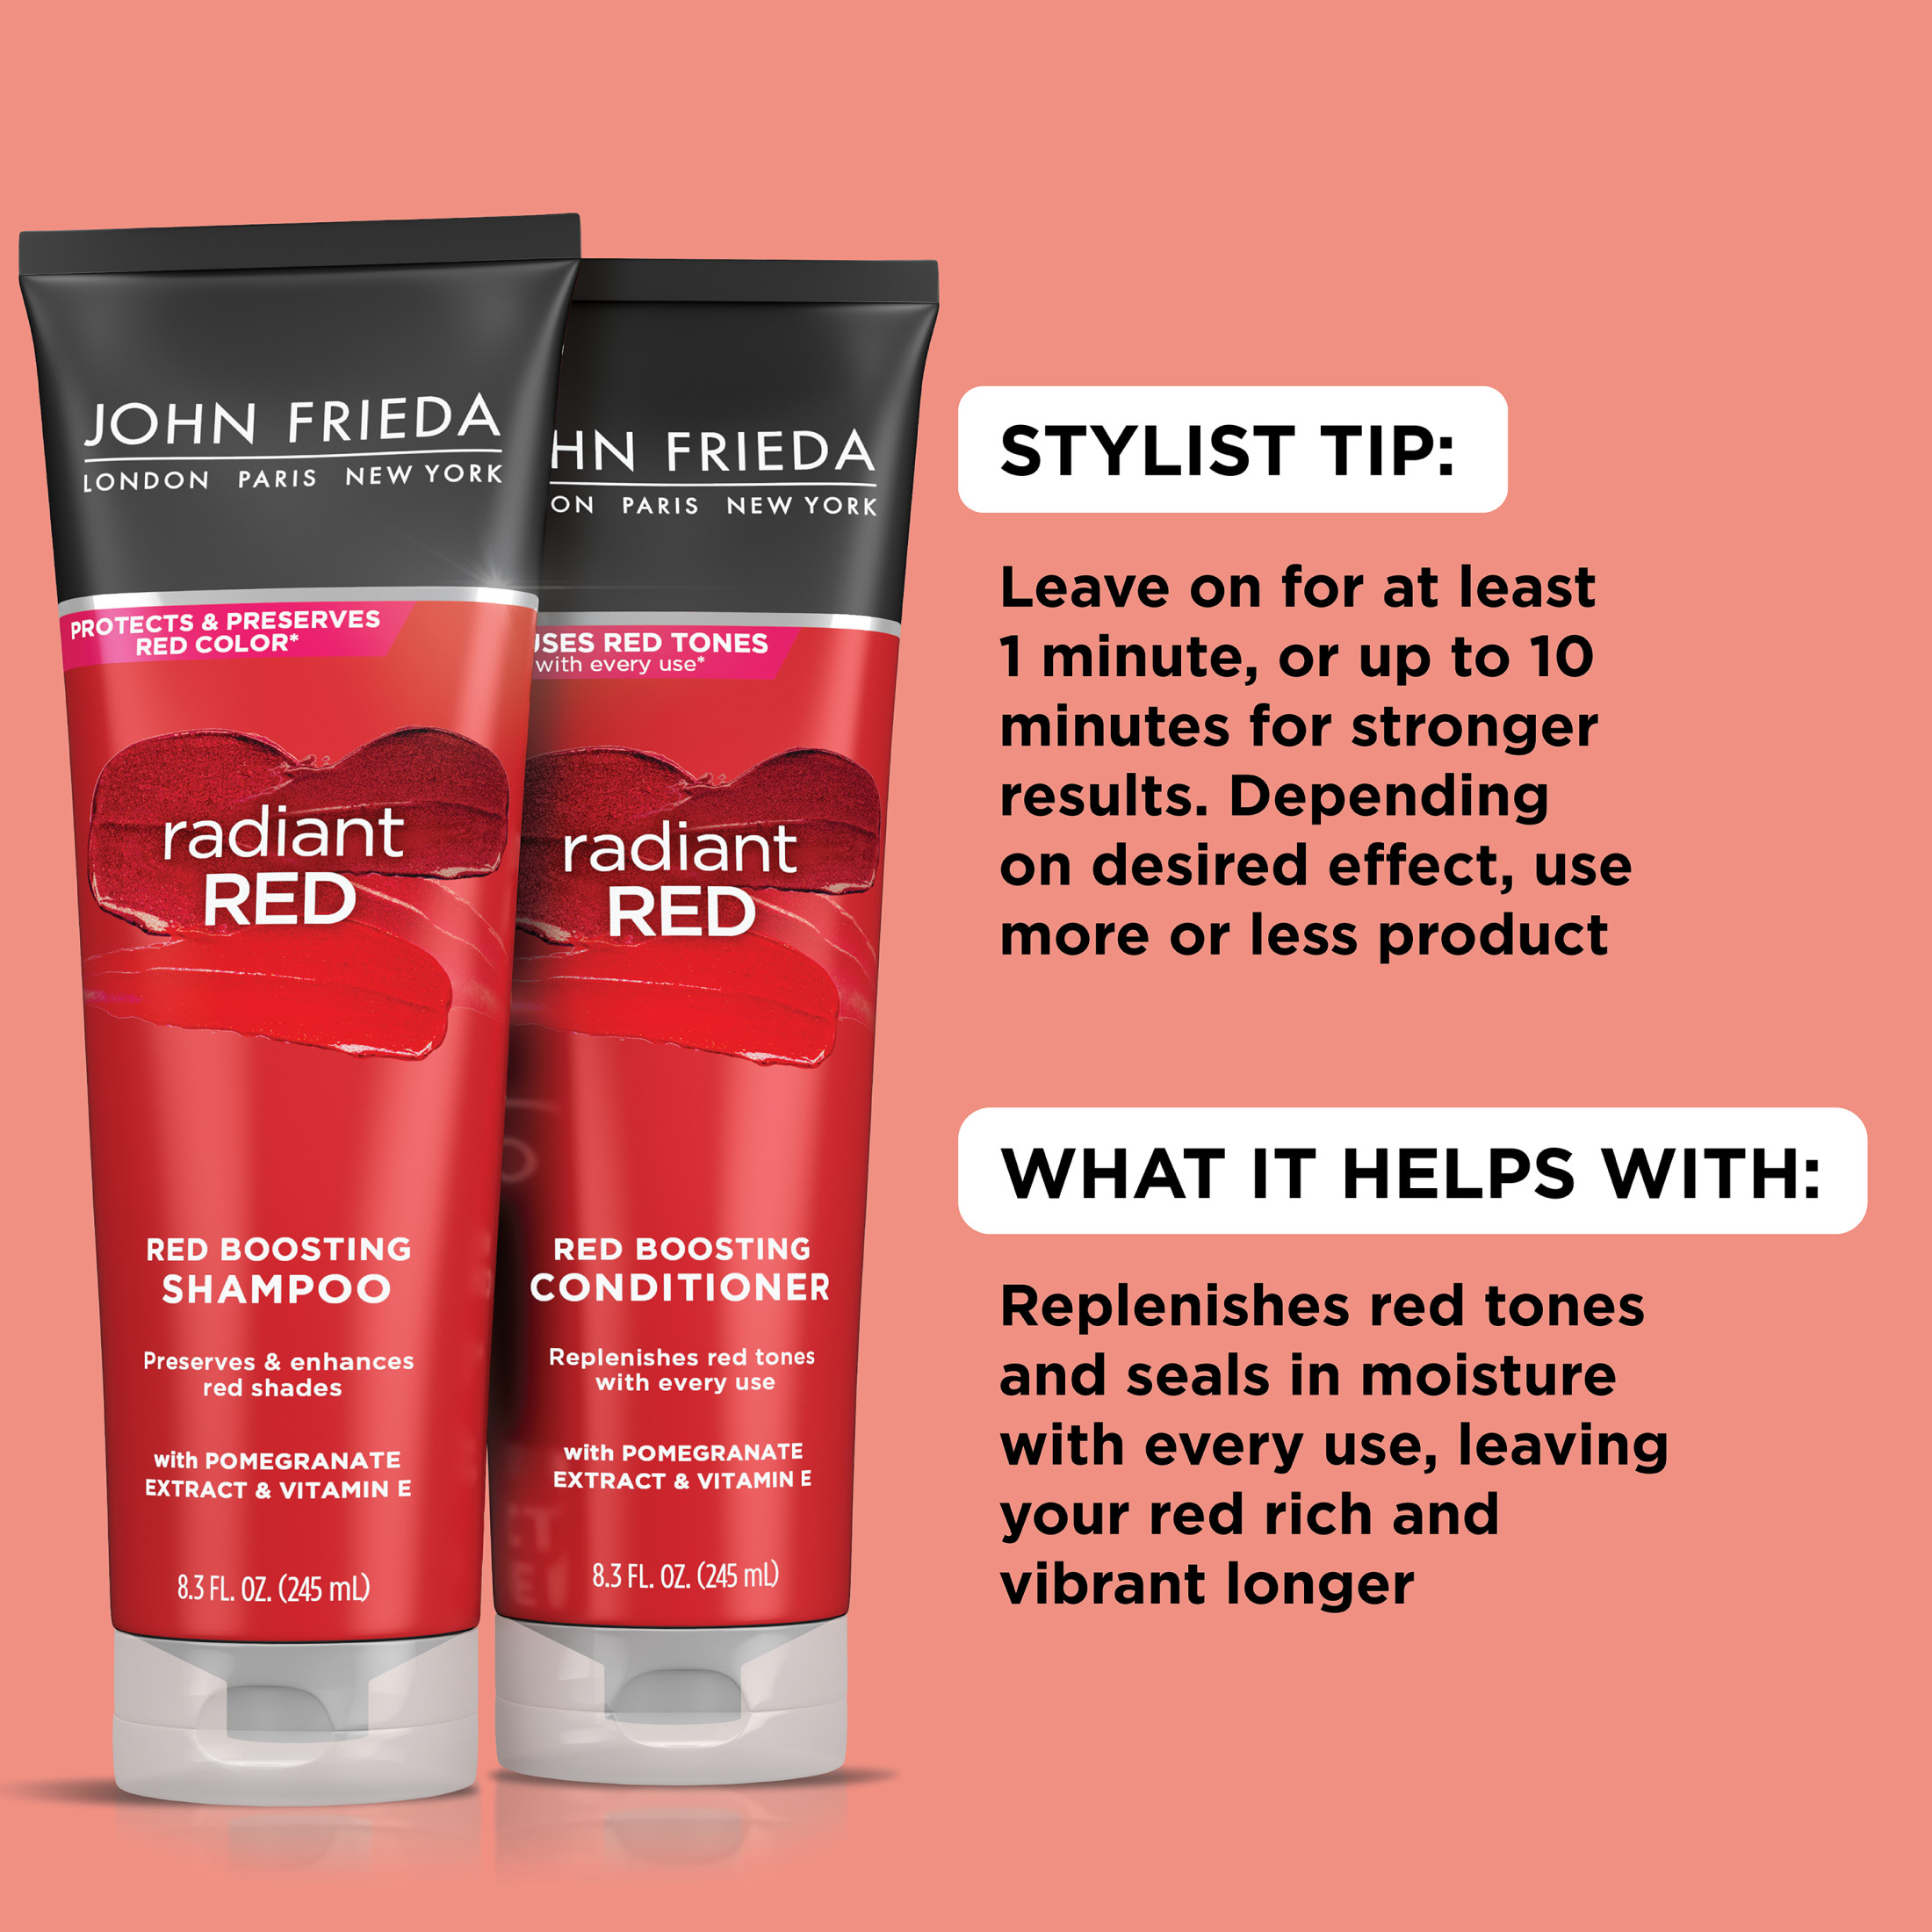 John Frieda Radiant Red Red Boosting Daily Shampoo, Color-Enhancing Shampoo for Red Hair, 8.3 fl oz - image 2 of 8